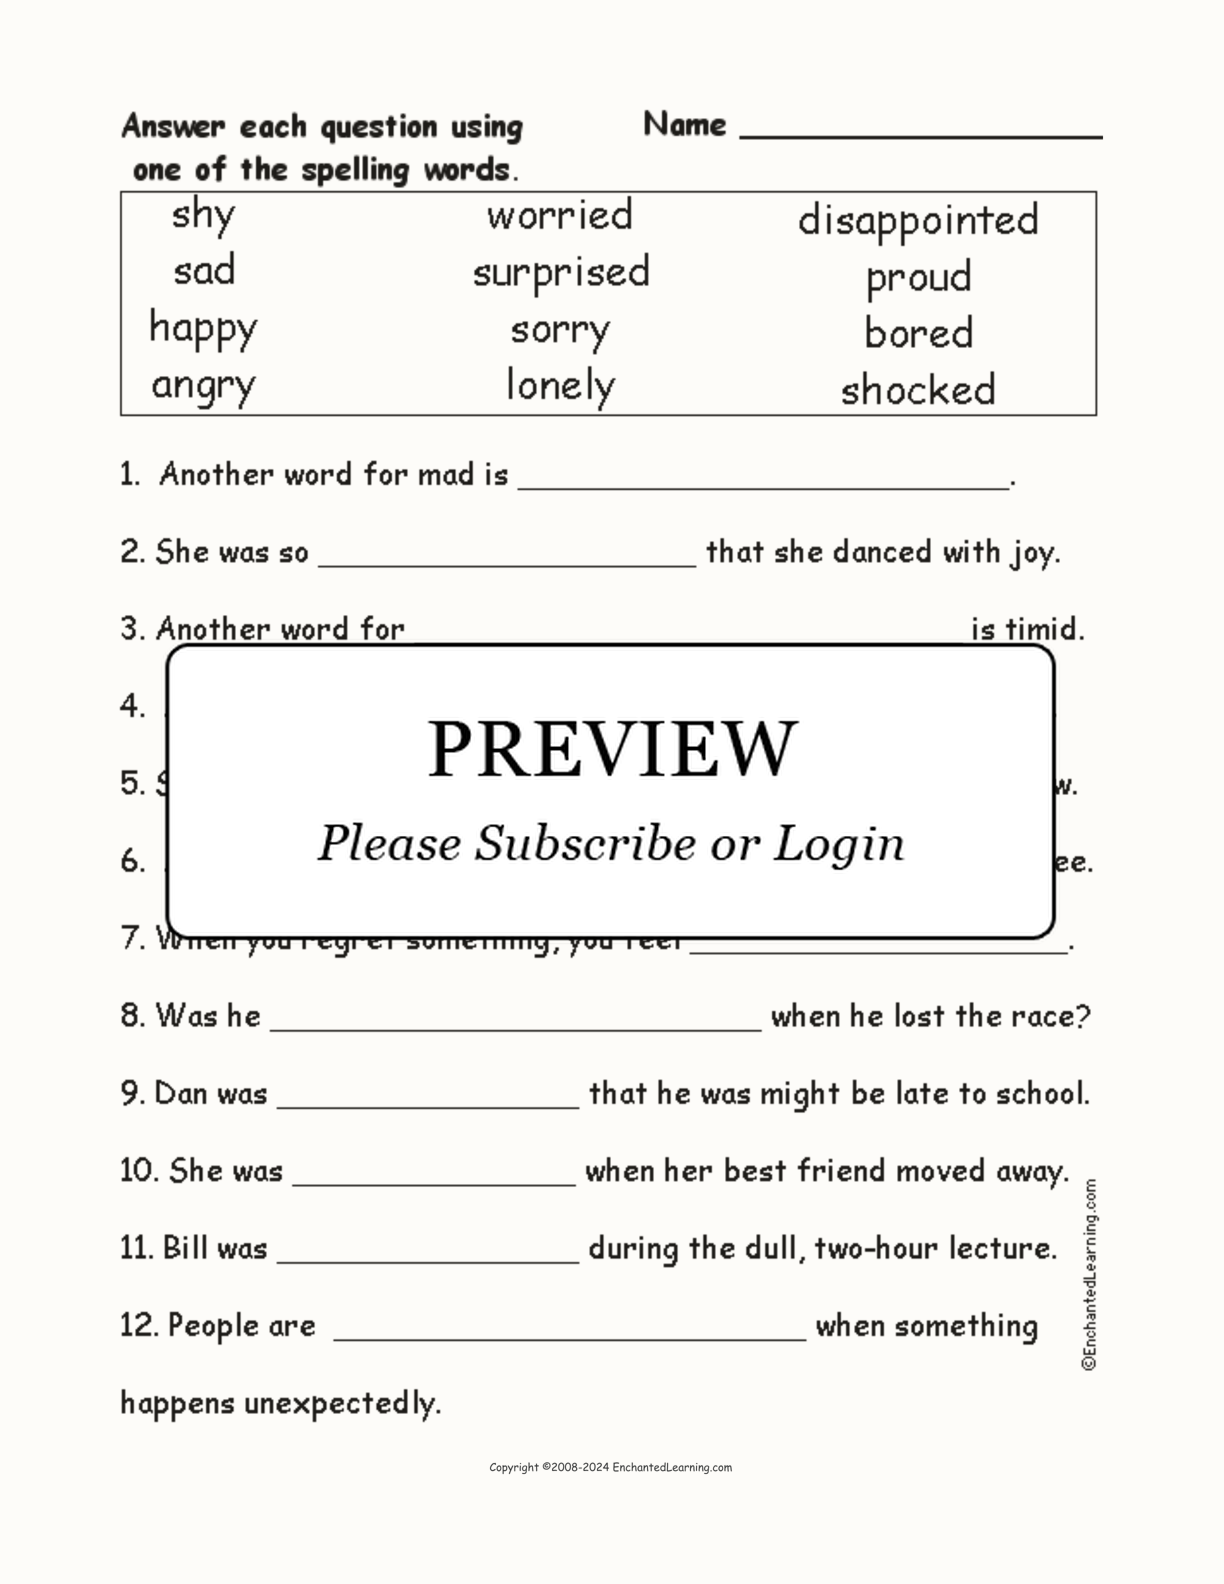 Emotion Spelling Word Questions interactive worksheet page 1